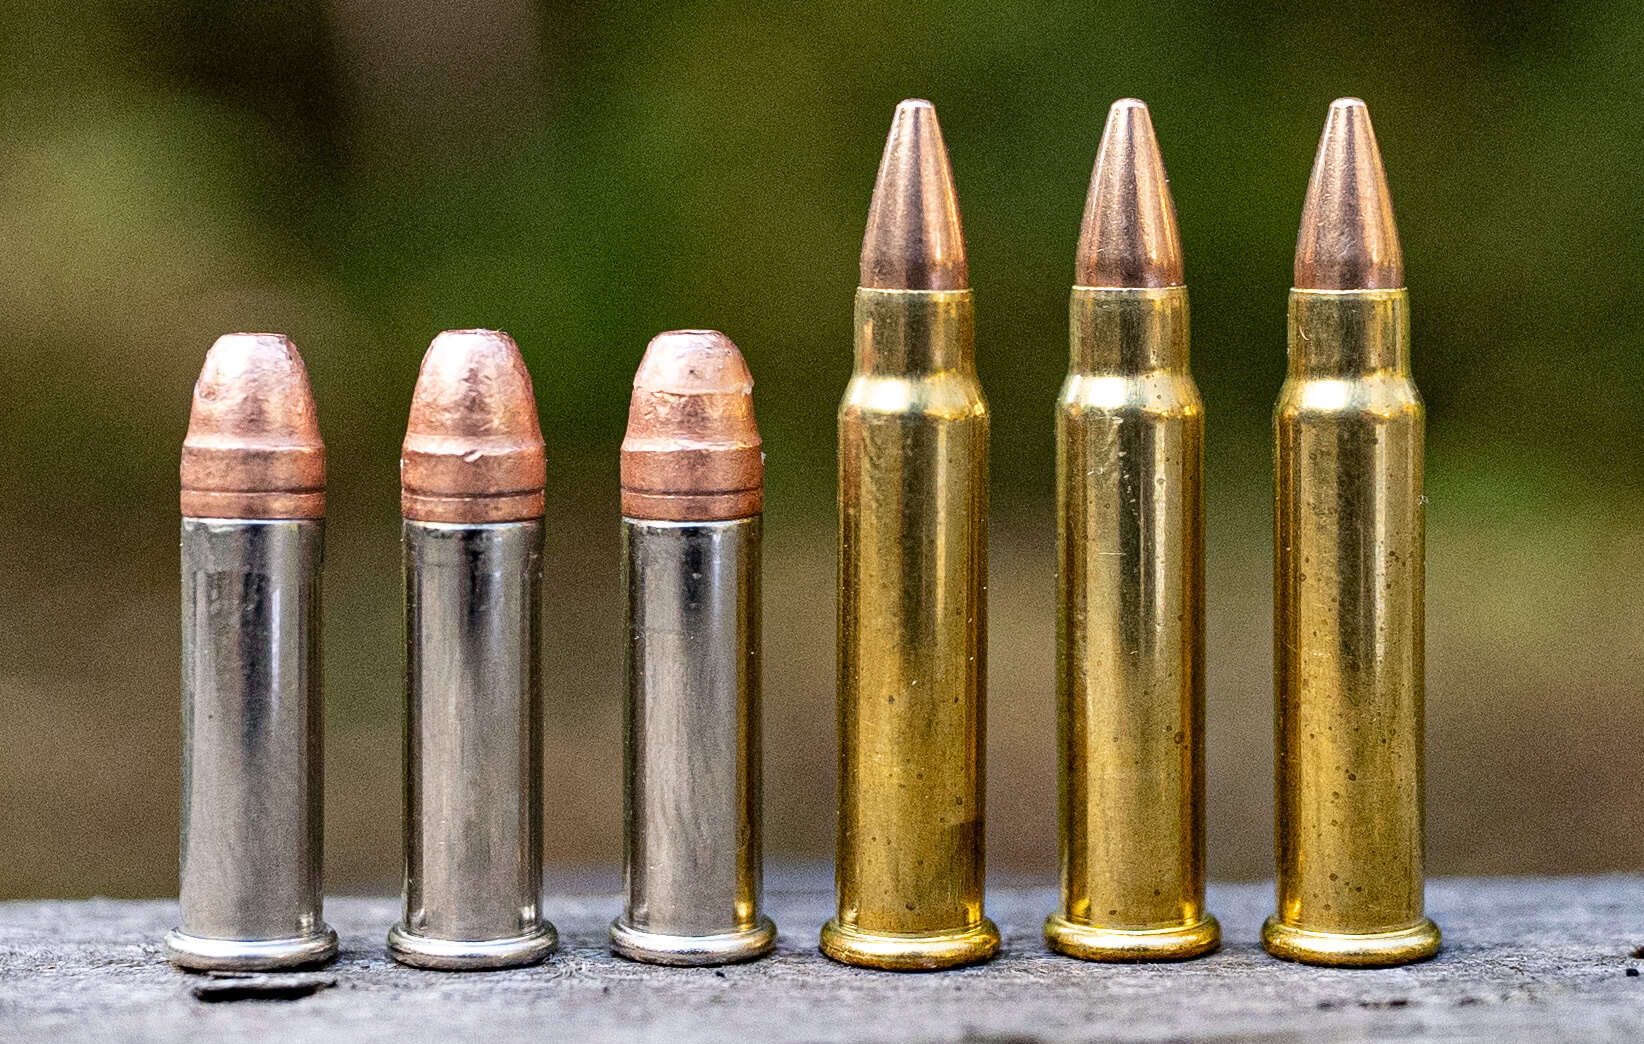 17 HMR vs 22 LR: Which Small-Caliber Round Is Best?